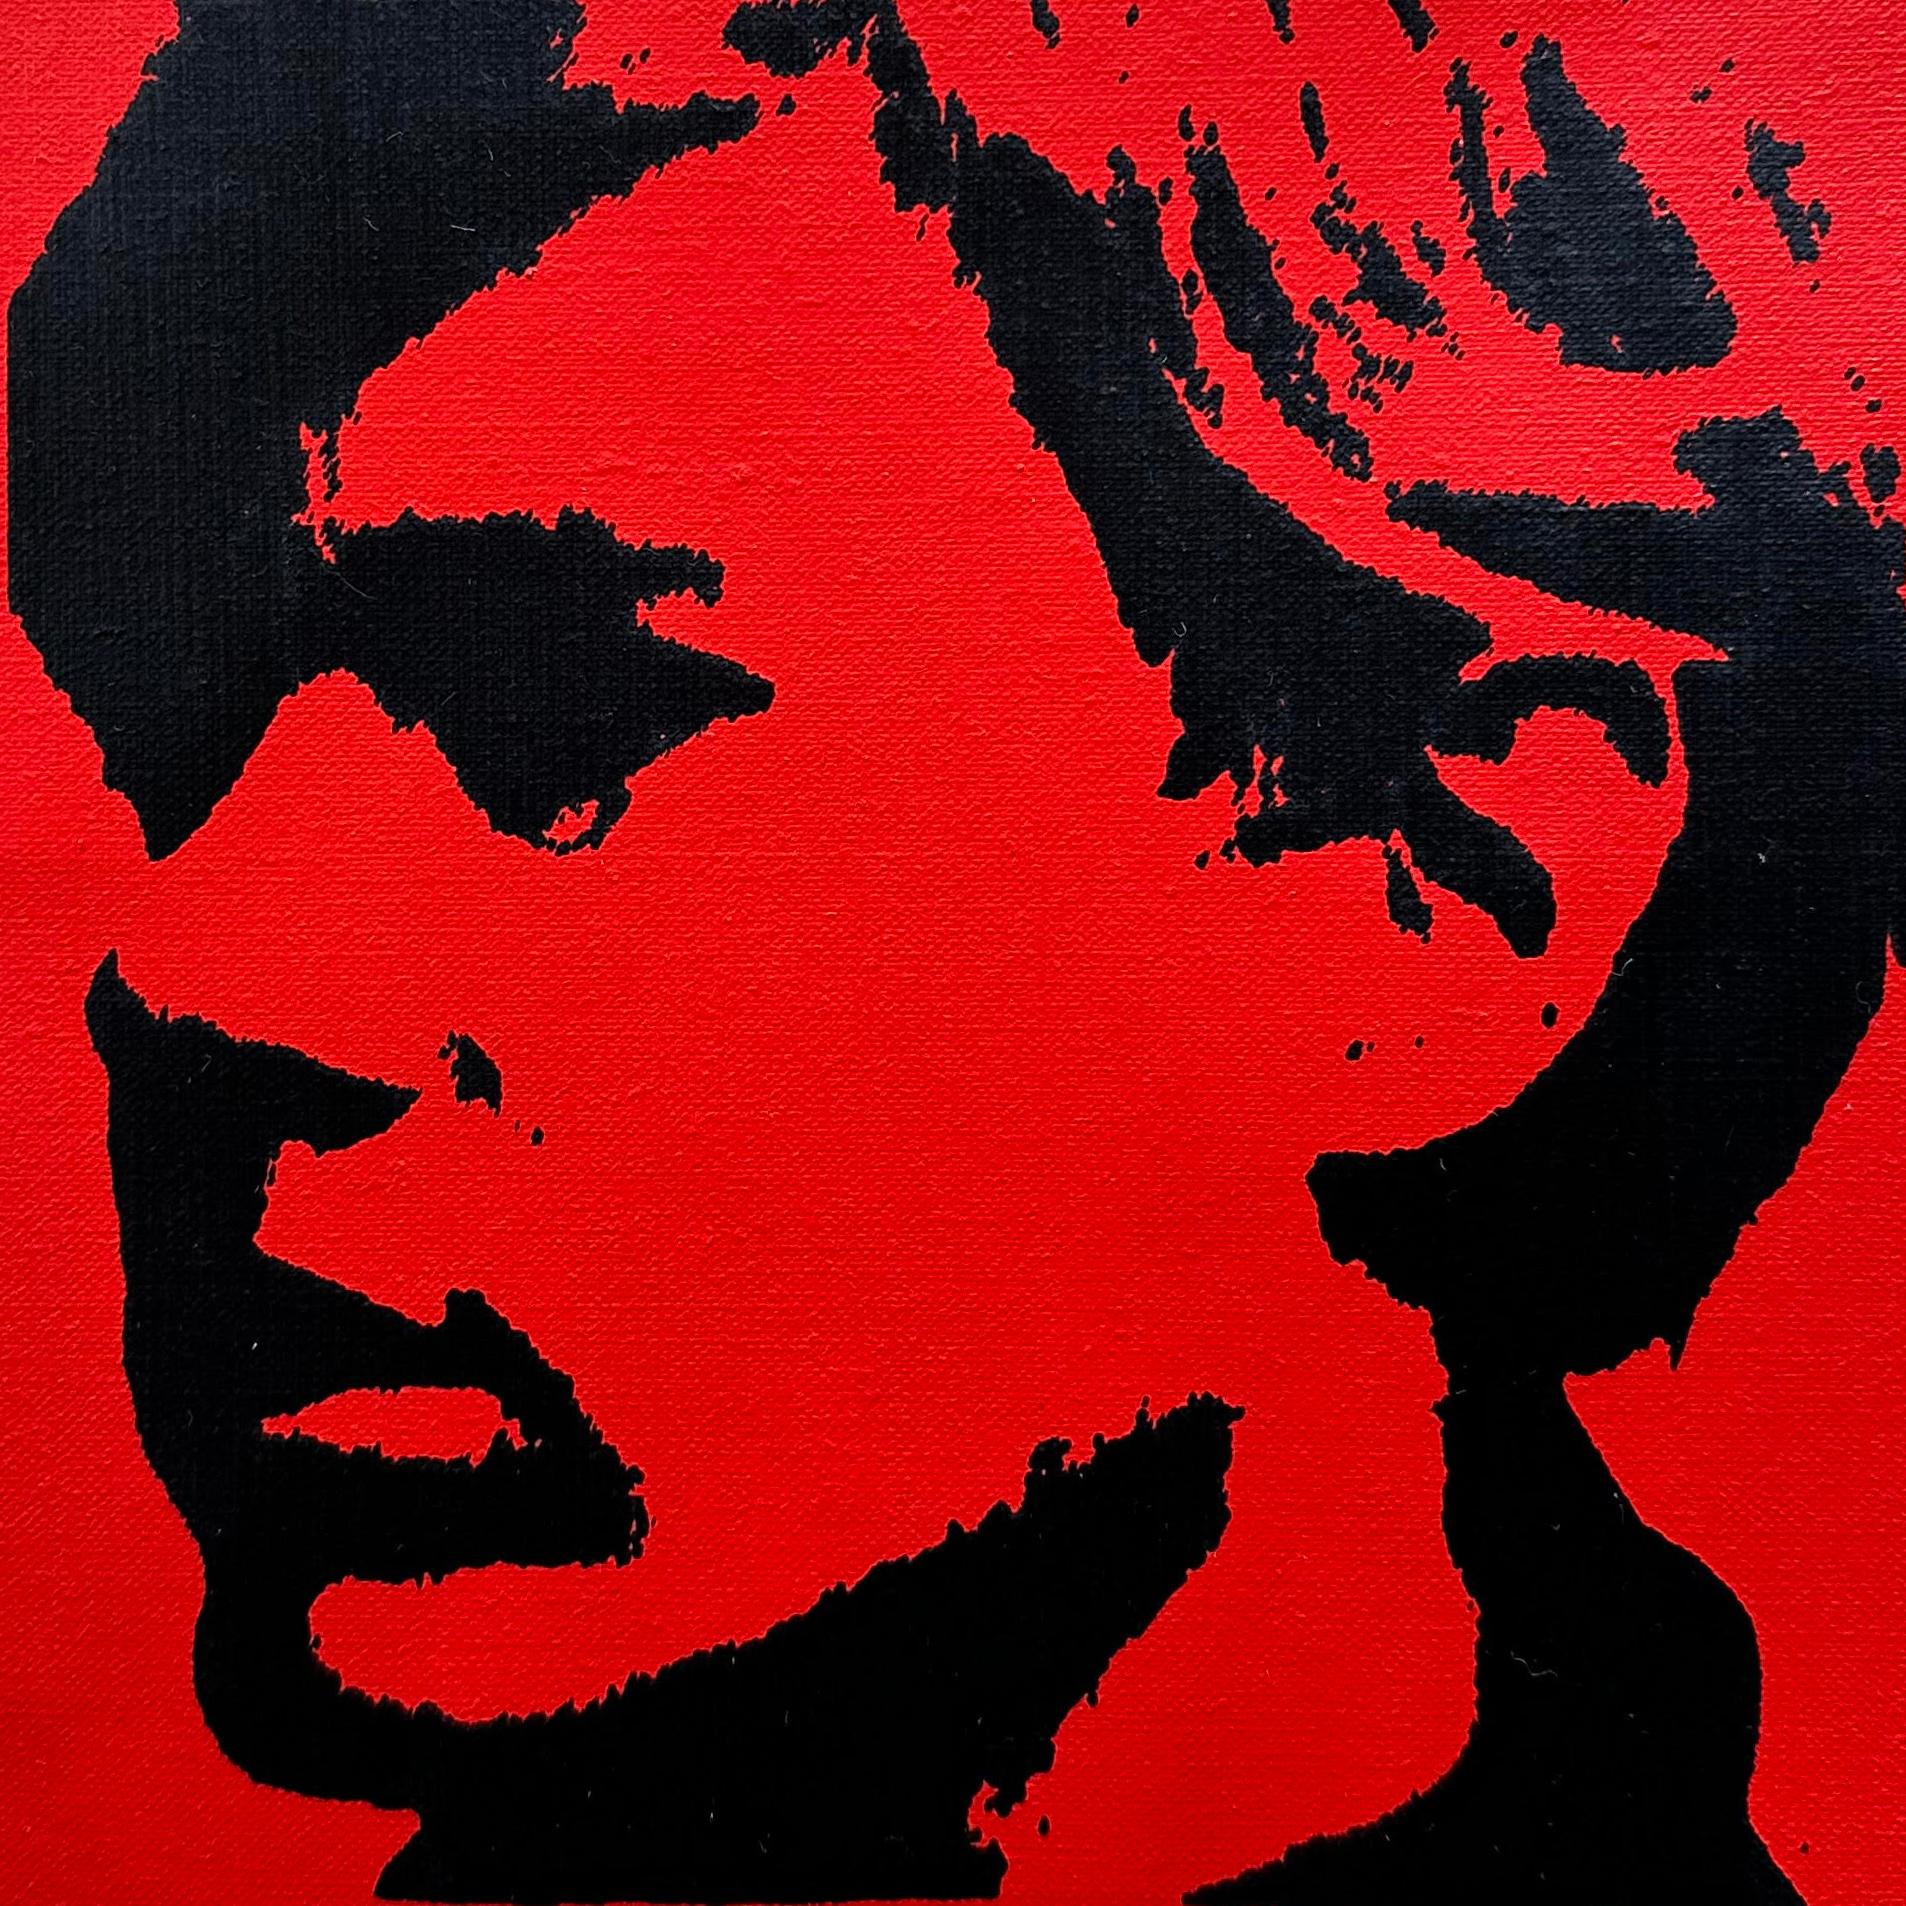 Andy Warhol Self portrait Denied Painting canvas red on linen by Charles Lutz For Sale 3